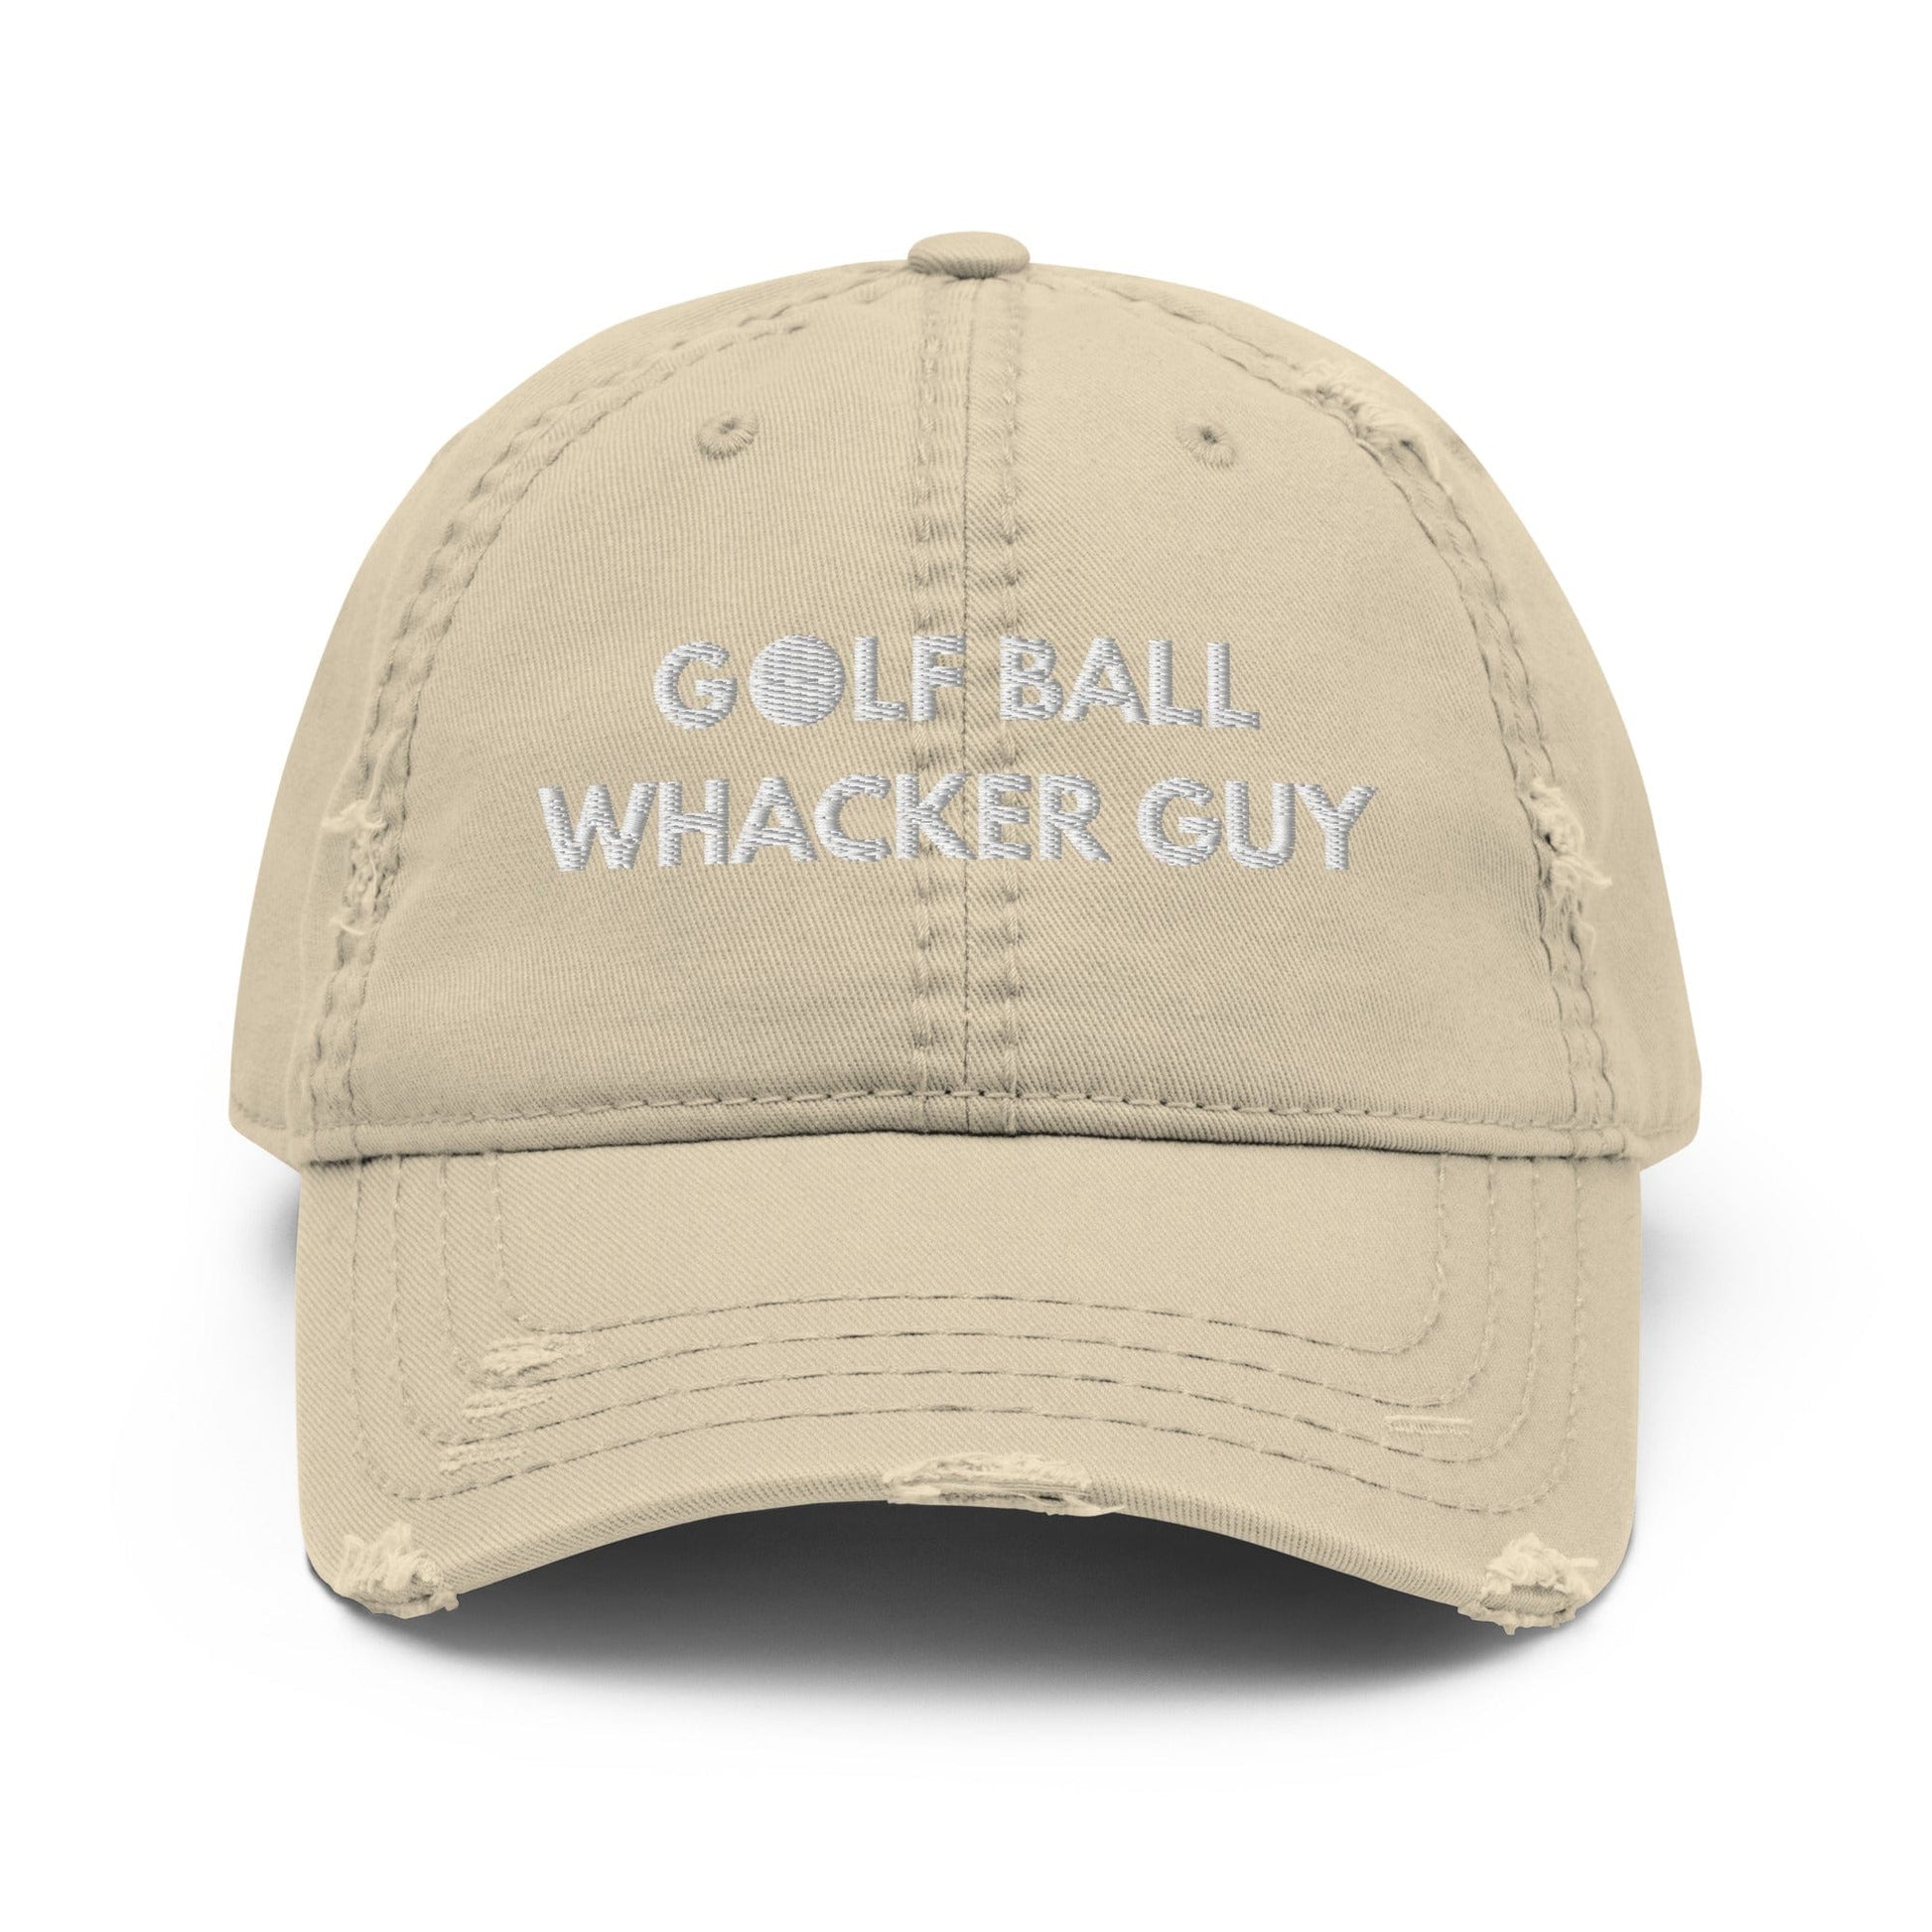 Funny Golfer Gifts  Distressed Cap Khaki Golf Ball Whacker Guy Hat Distressed Hat